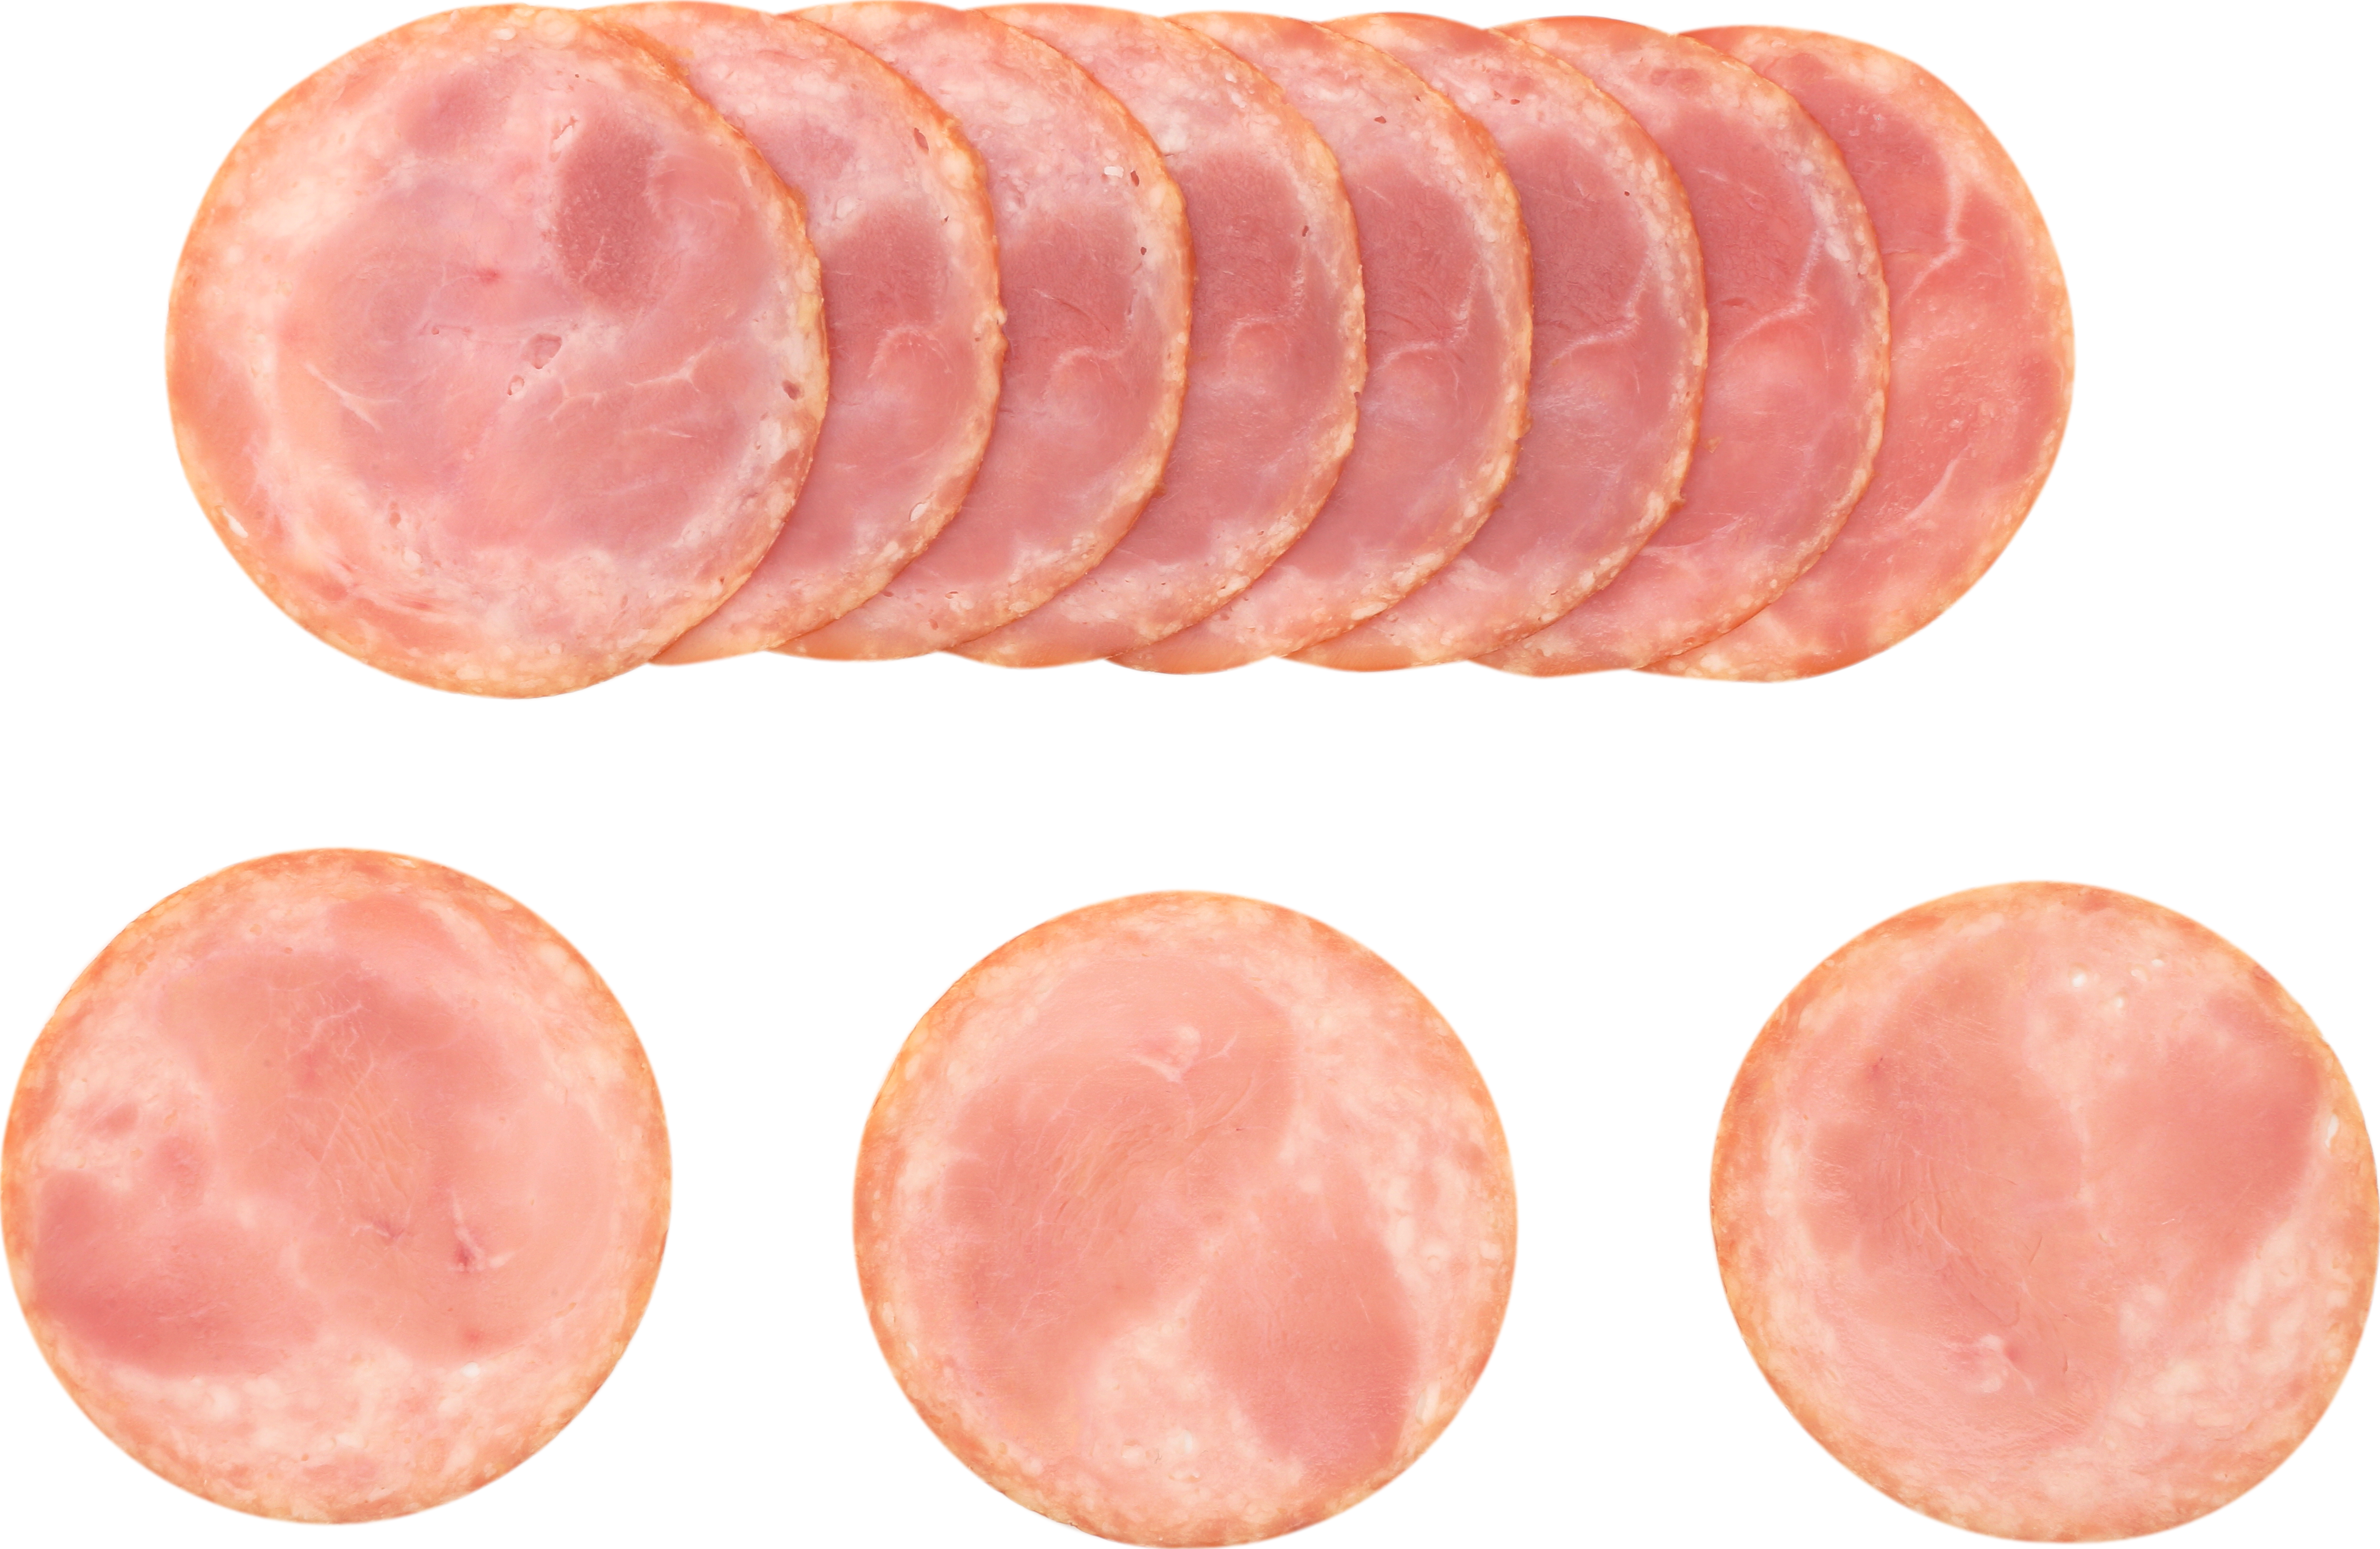 Bonici® Wilson™ Fully Cooked Sliced Smoked Canadian Brand Pork Roll, 80 slices per lb, 2/5 Lb